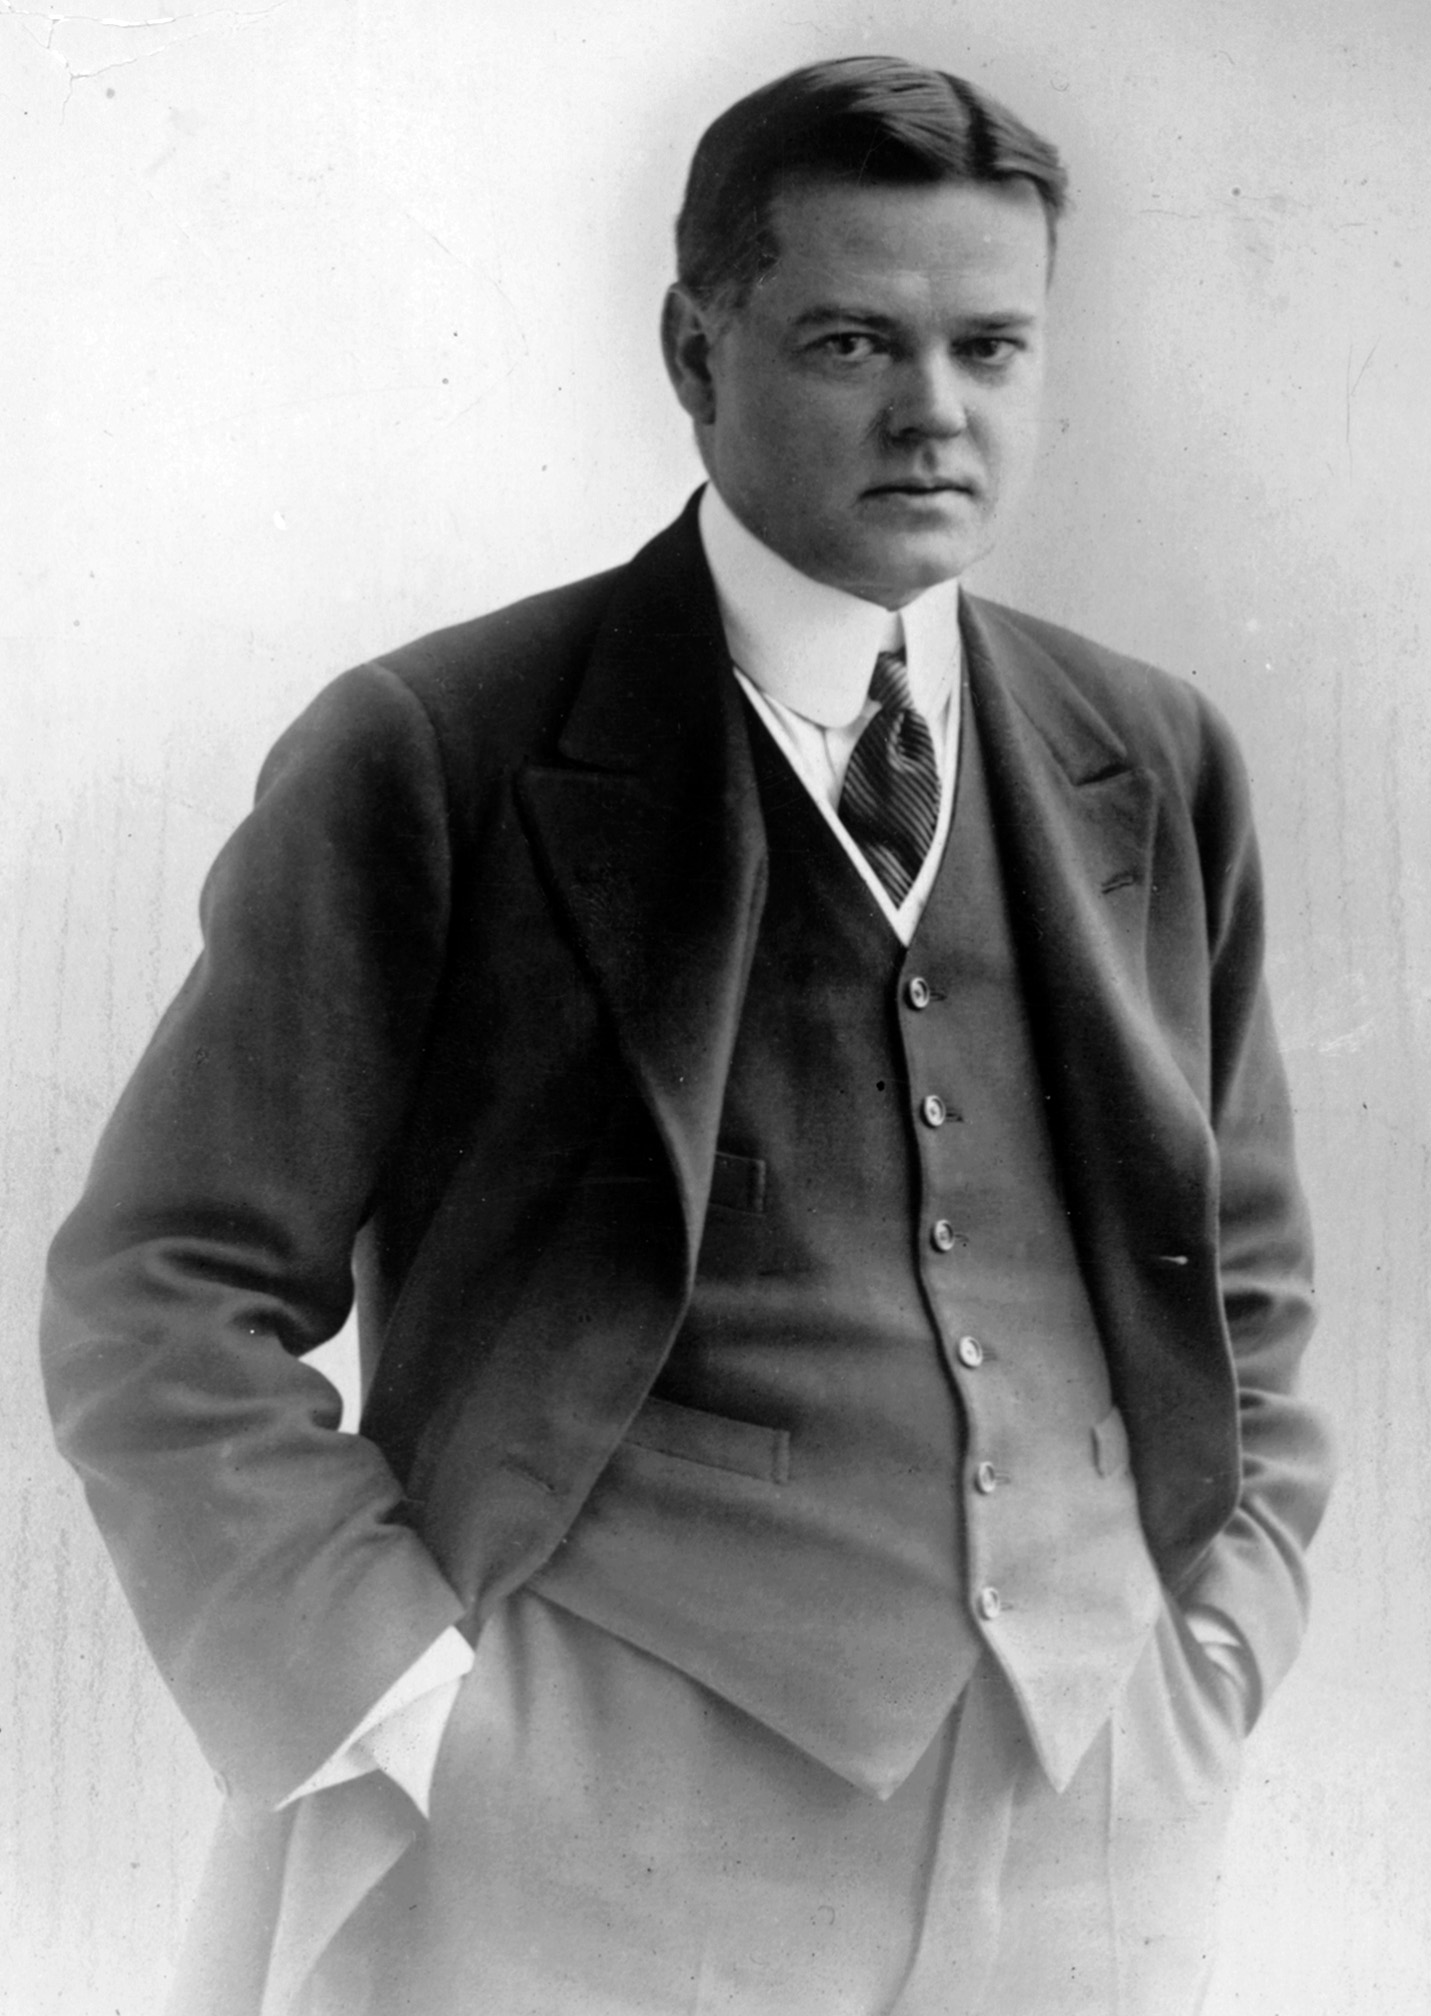 At the start of the war, Herbert Hoover was a 40-year-old mining engineer who was a no-nonsense, ambitious, get-it-done kind of American. He organized and build the Commission for Relief in Belgium (CRB).